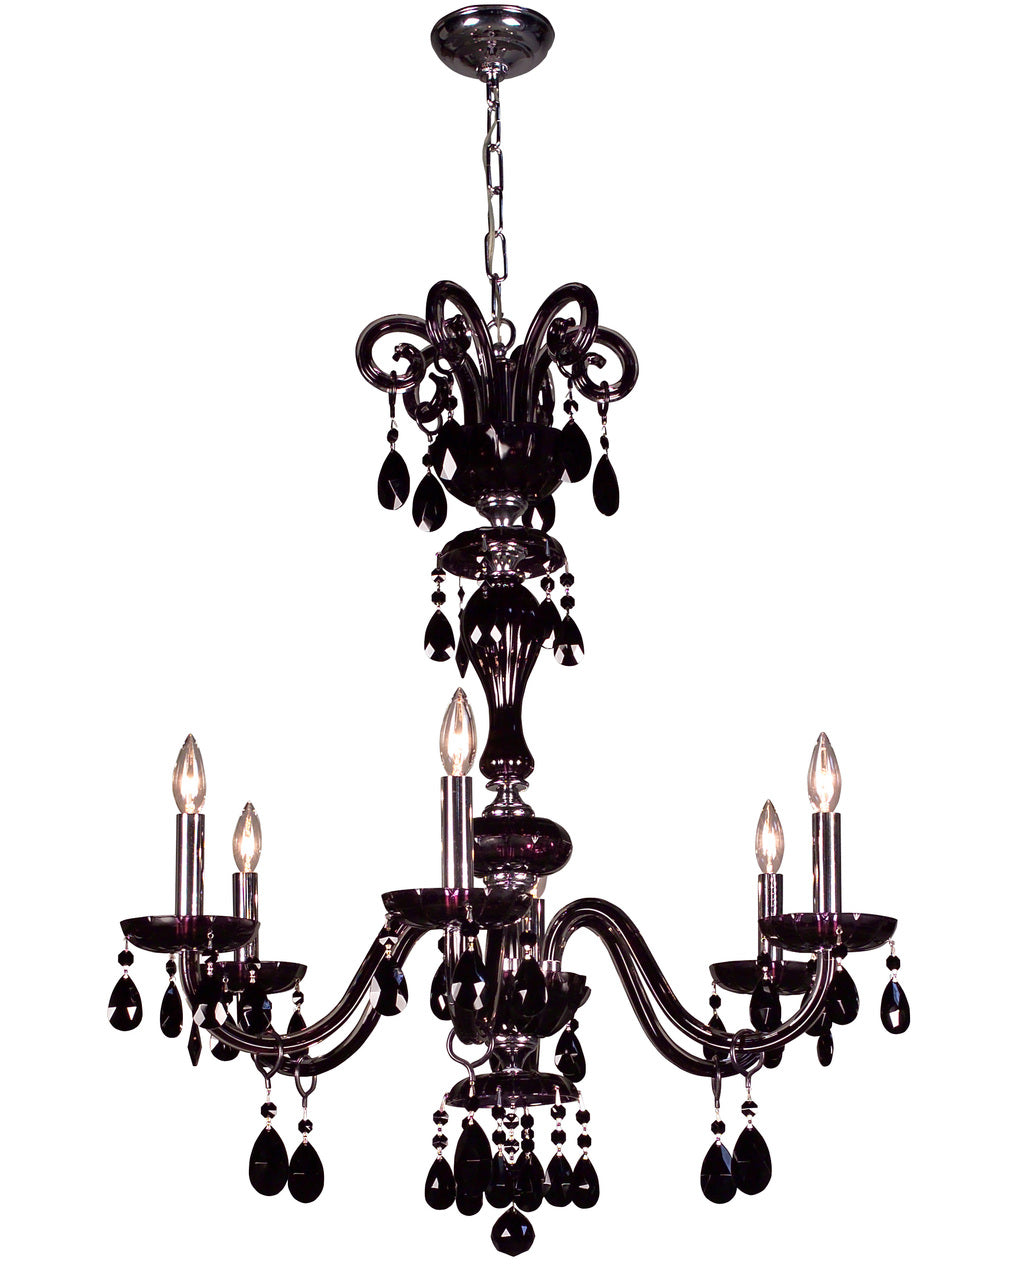 Classic Lighting 82006 CBK Monte Carlo Crystal Chandelier in Black (Imported from Spain)